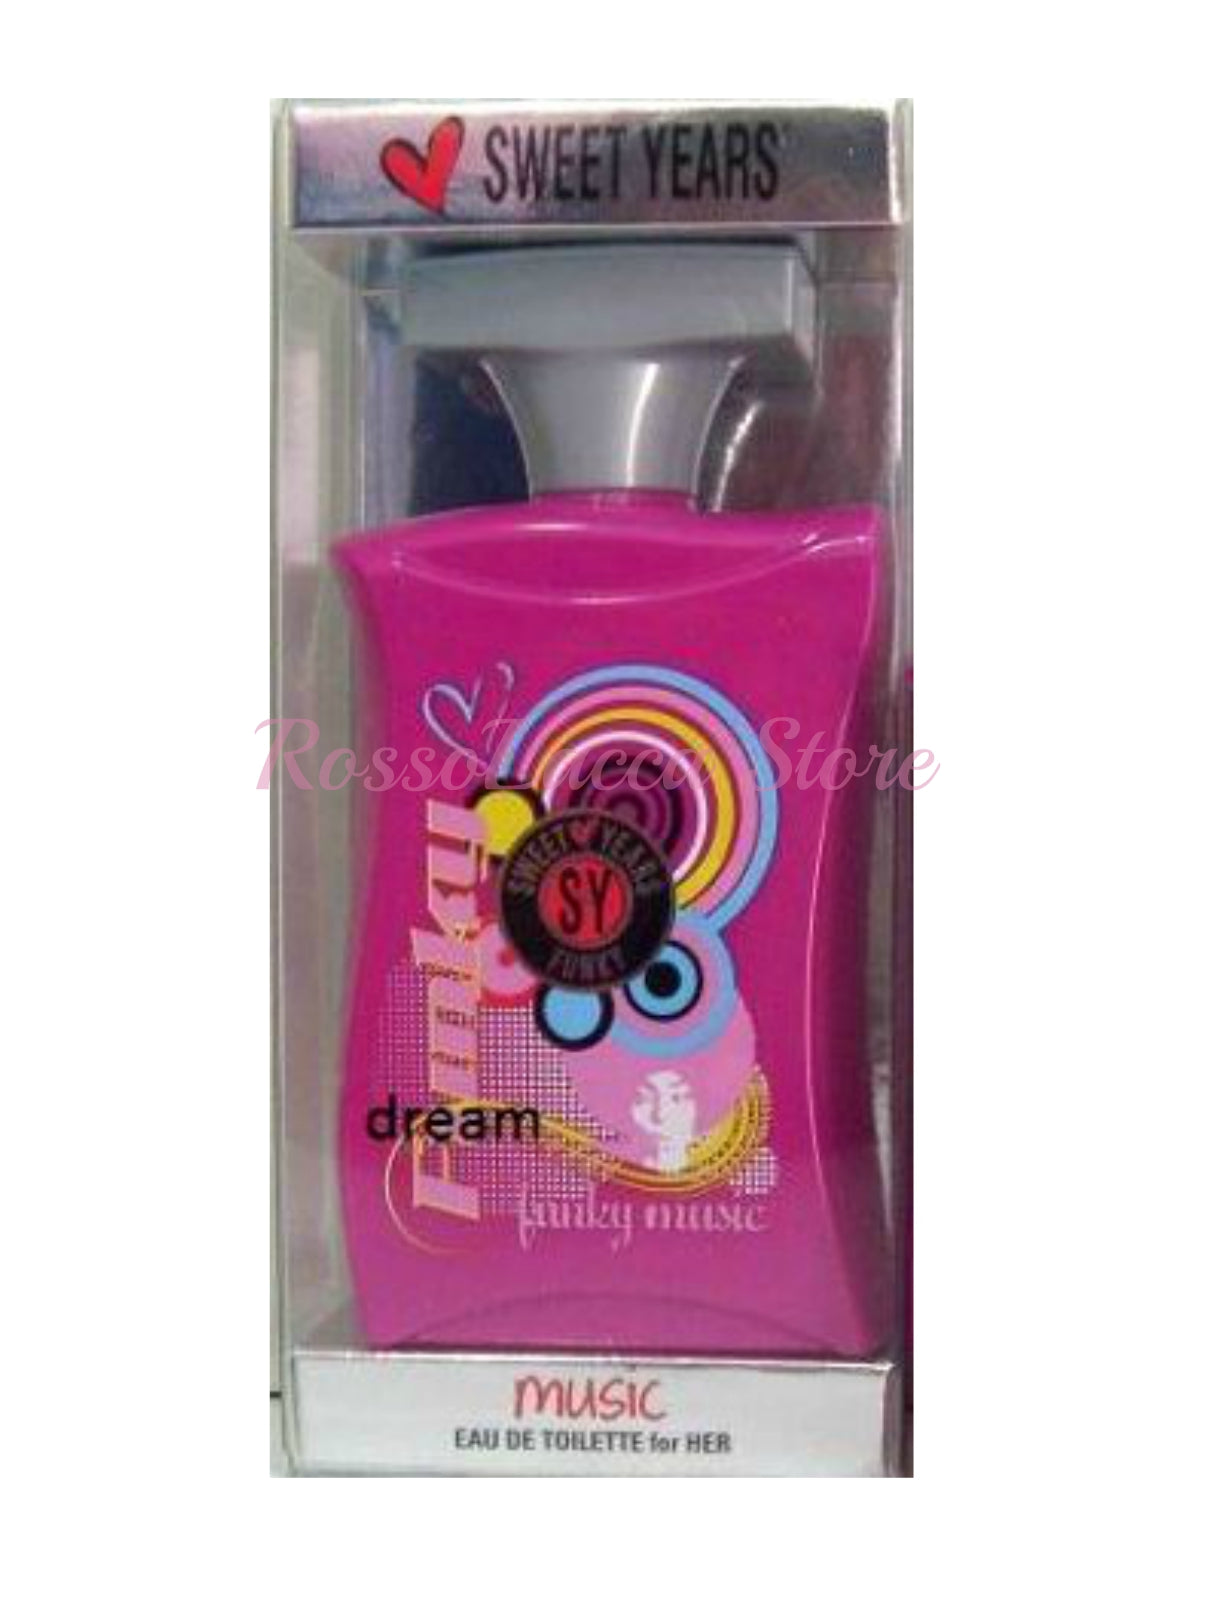 Sweet Years Funky Music Eau De Toilette For Her 50 Ml Spray - Outlet Price - RossoLaccaStore